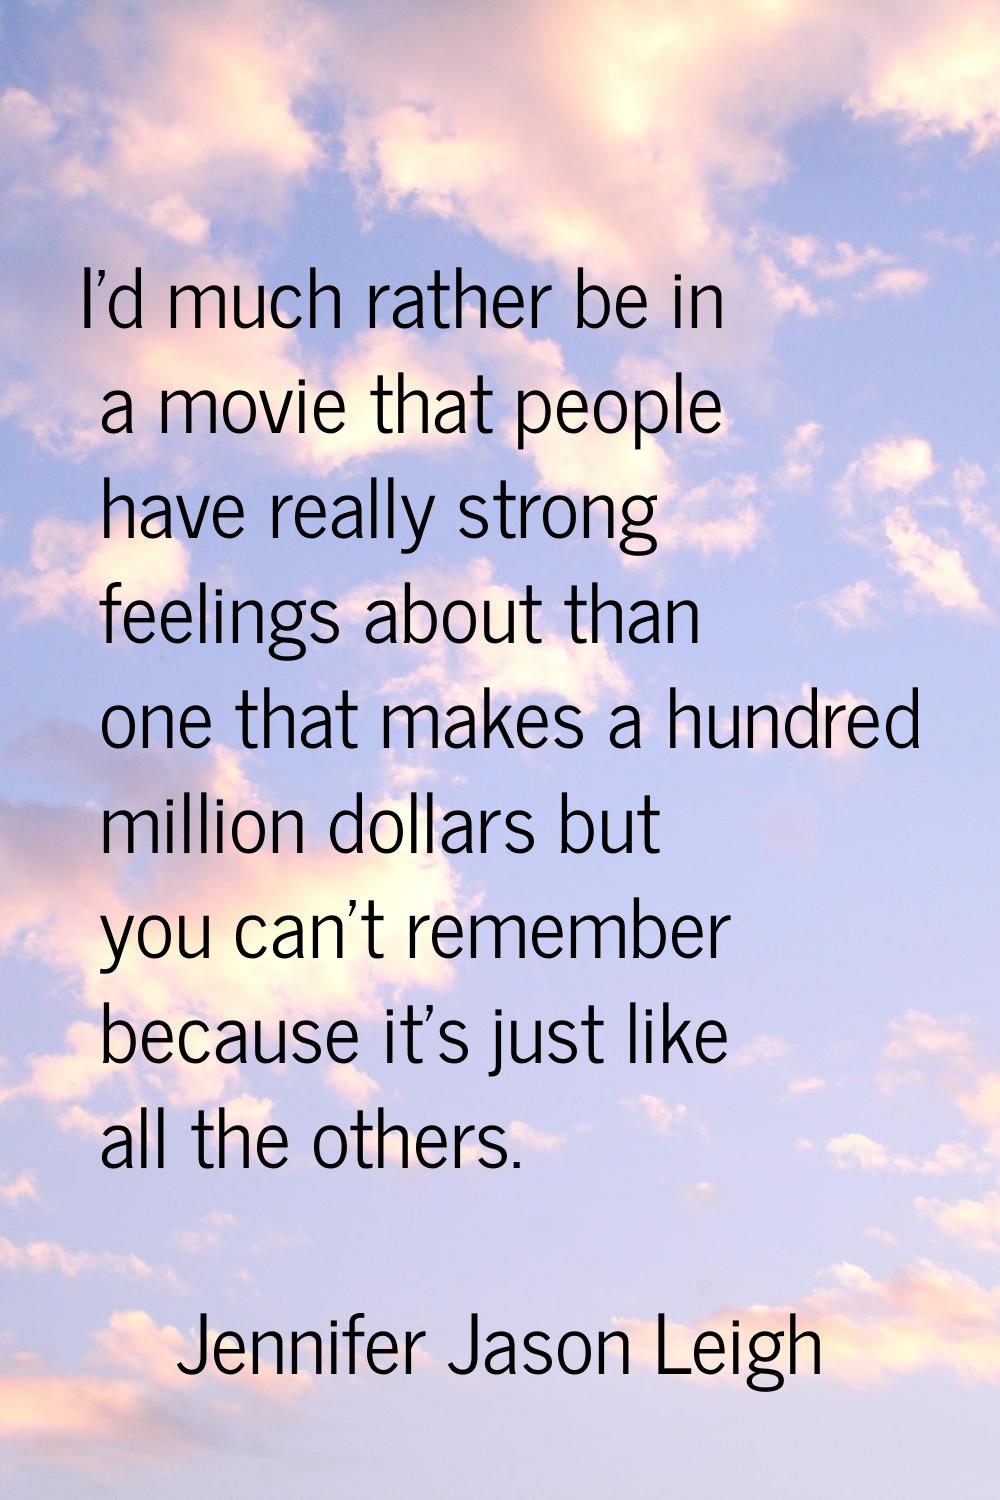 I'd much rather be in a movie that people have really strong feelings about than one that makes a h